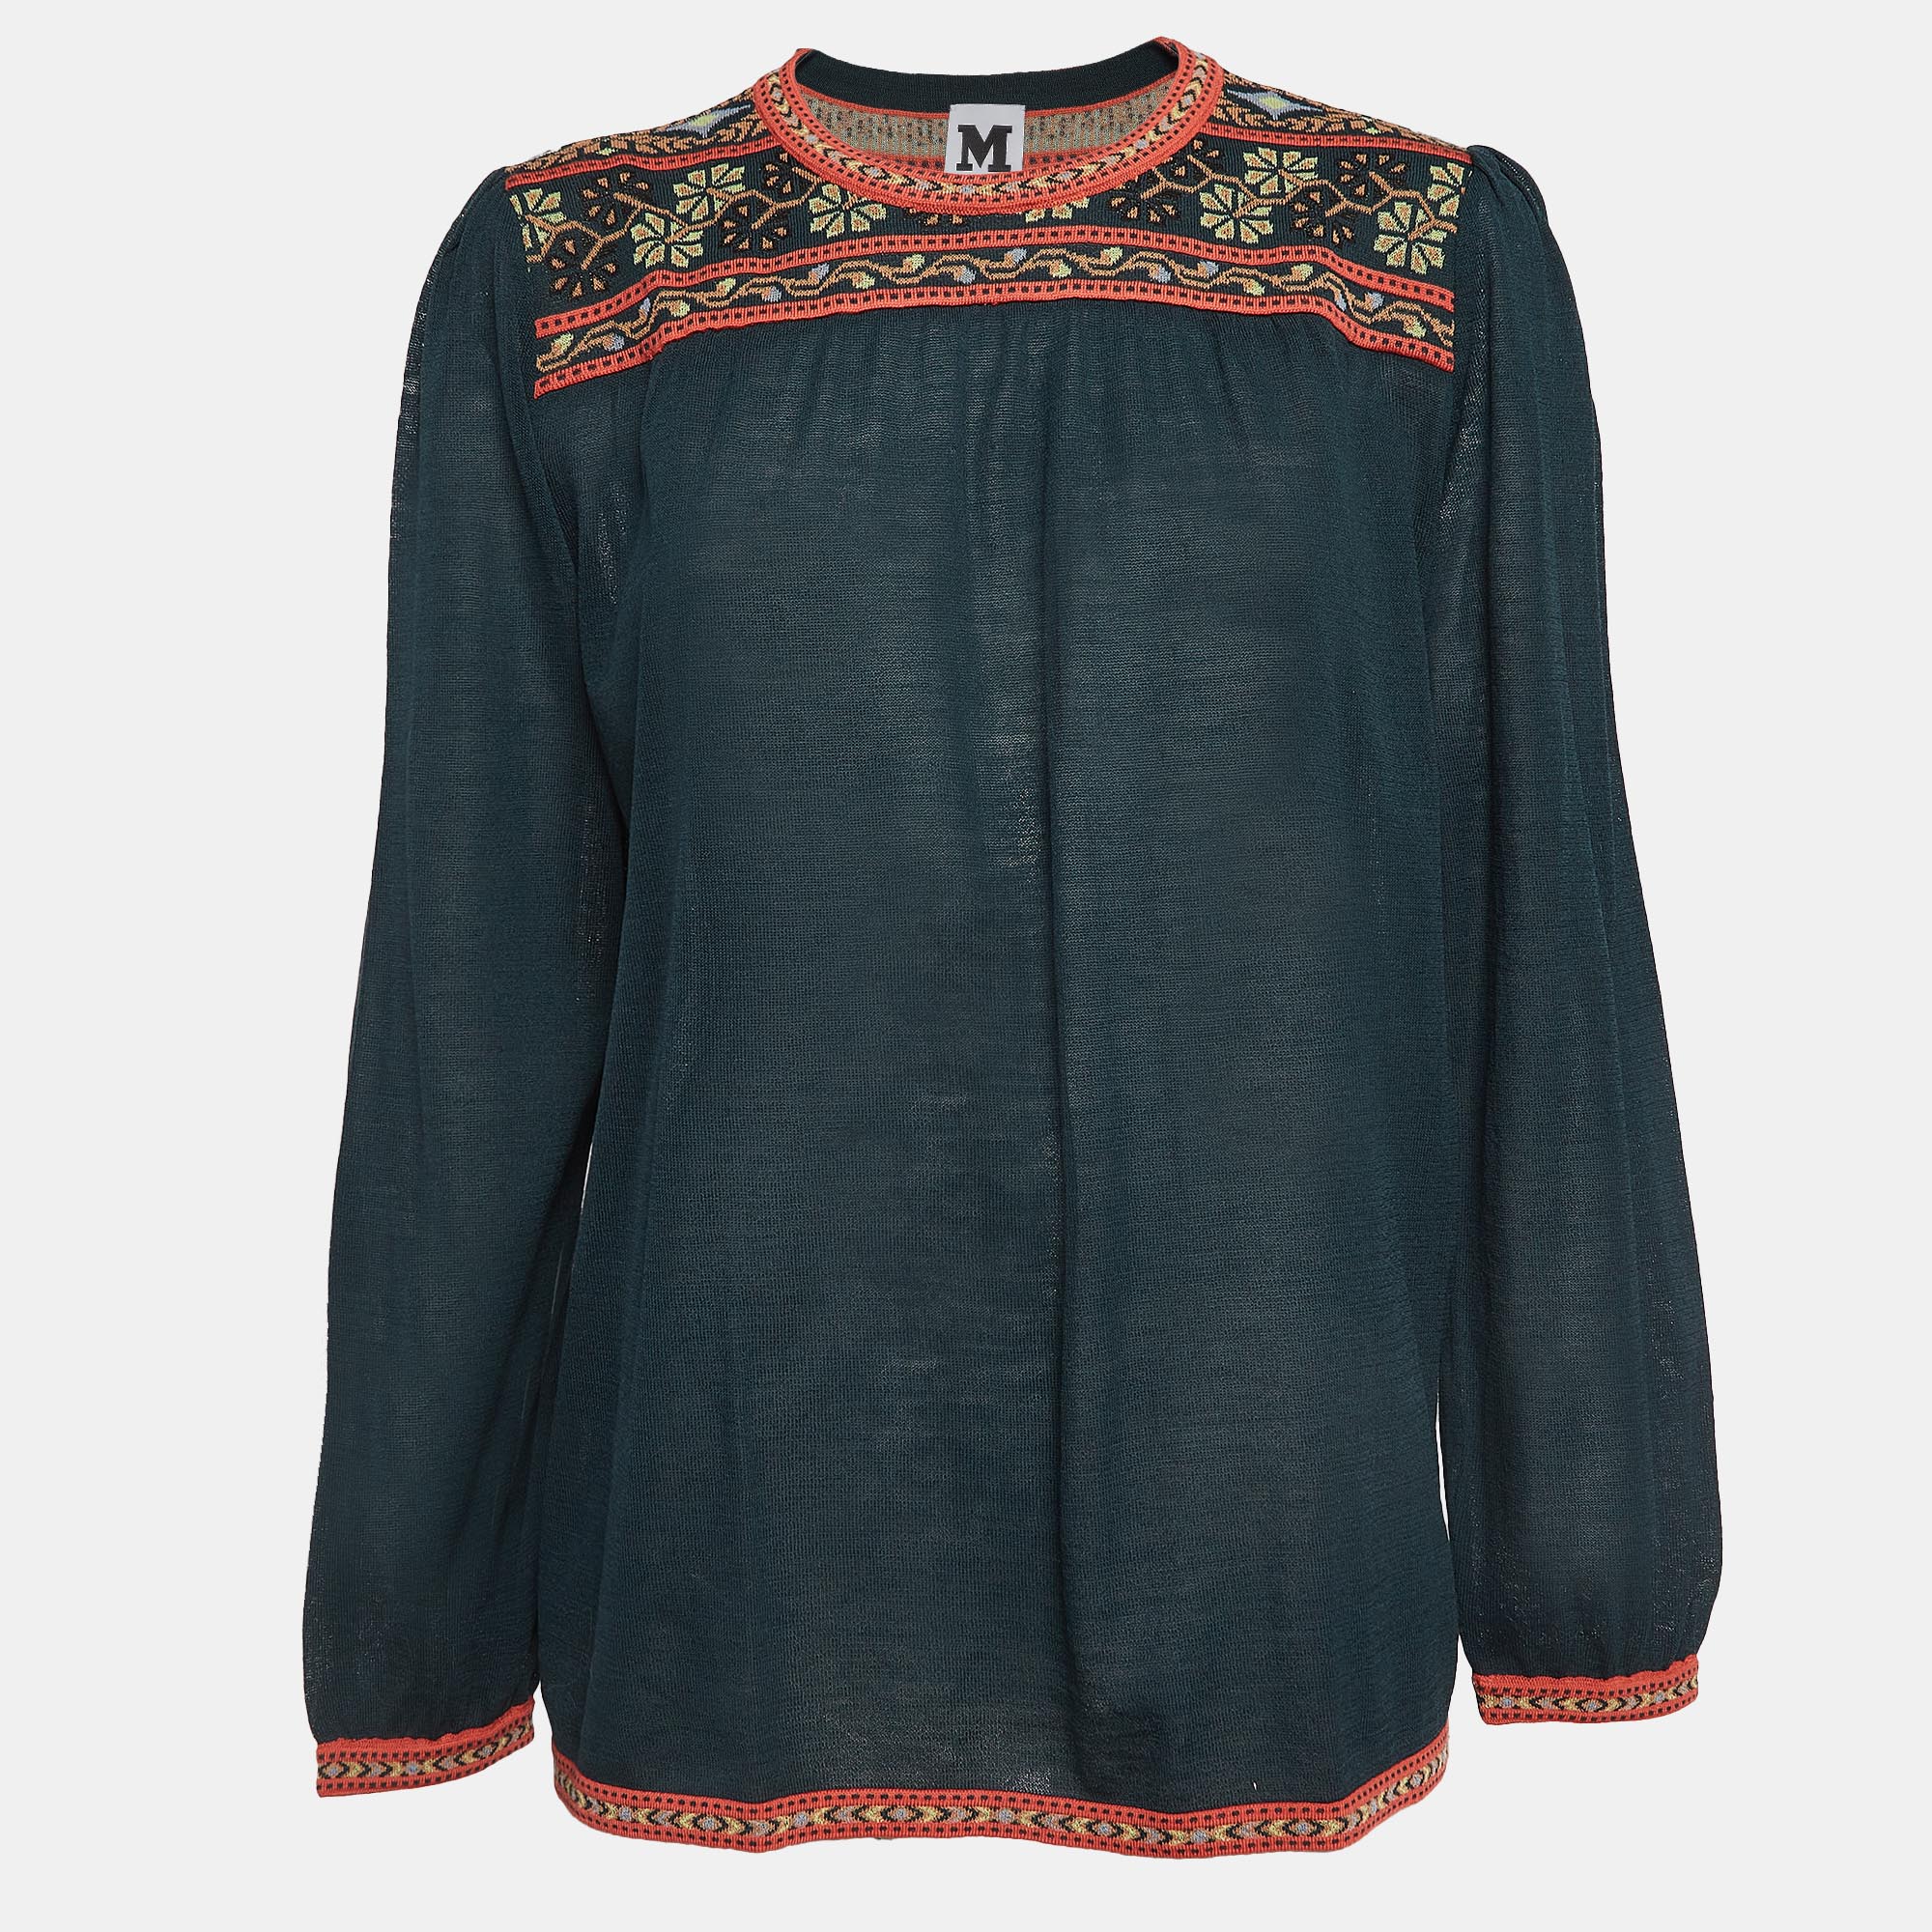 

M Missoni Green Floral Pattern Knit Long Sleeve Top